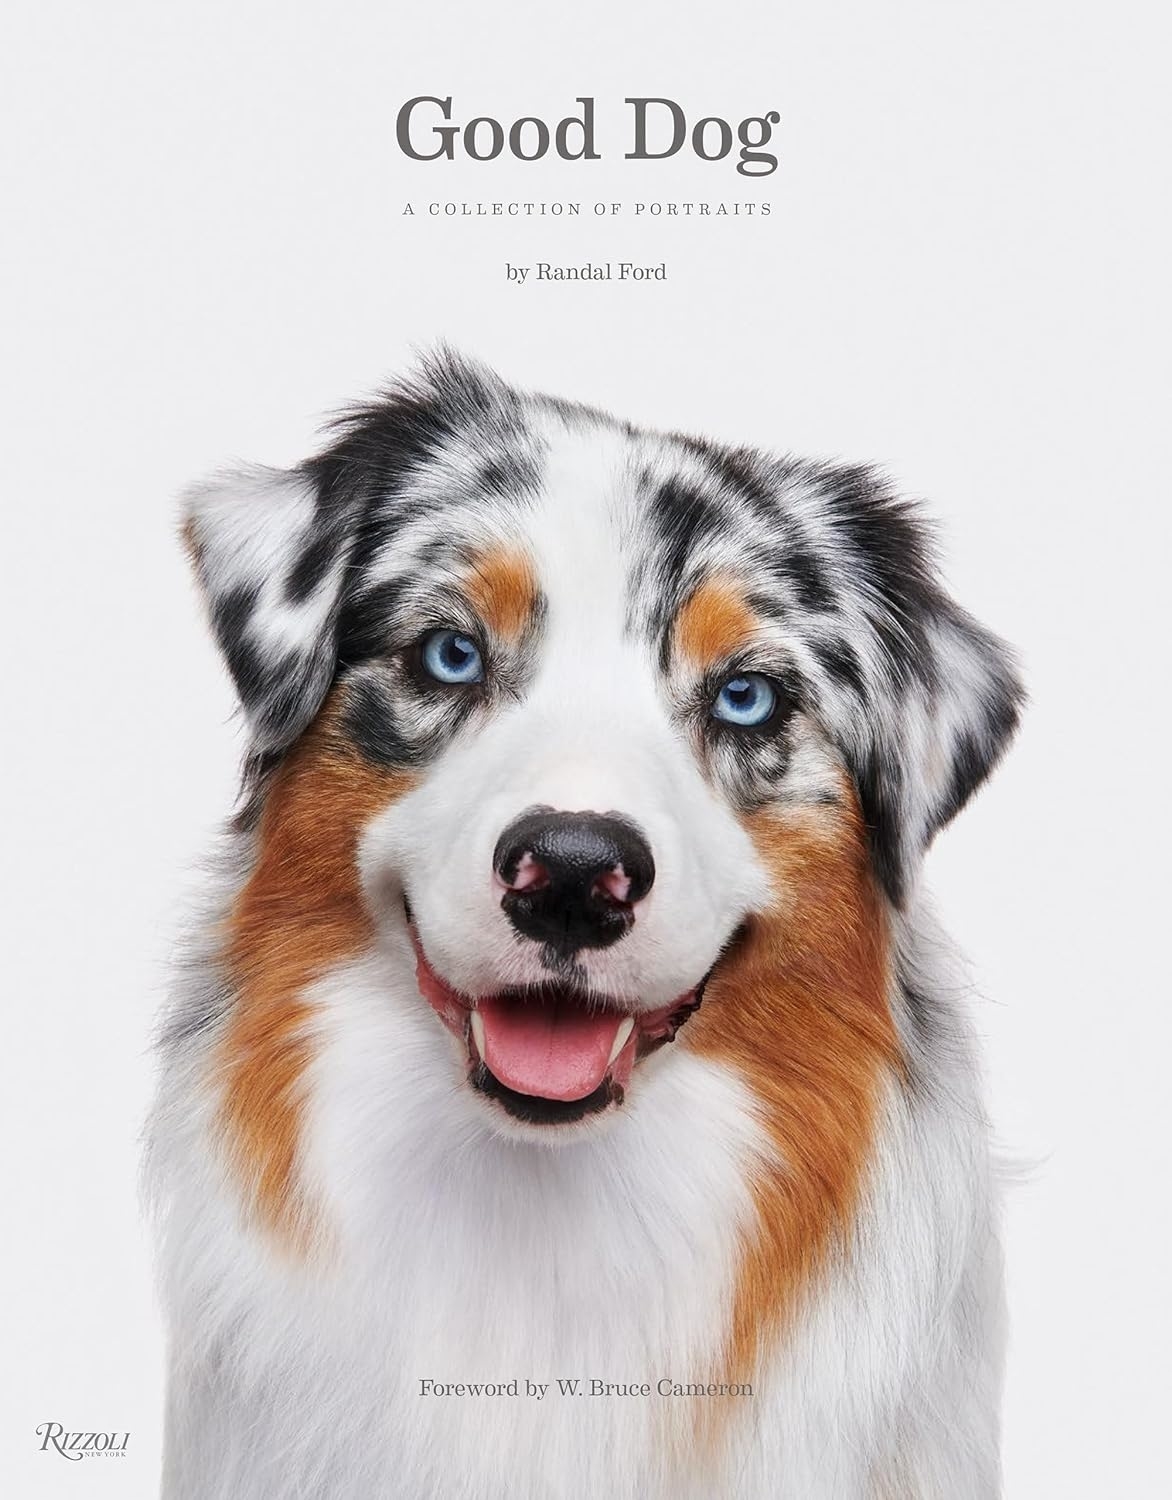 Cover of &#x27;Good Dog&#x27; book by Randall Ford featuring a portrait of a smiling Australian Shepherd